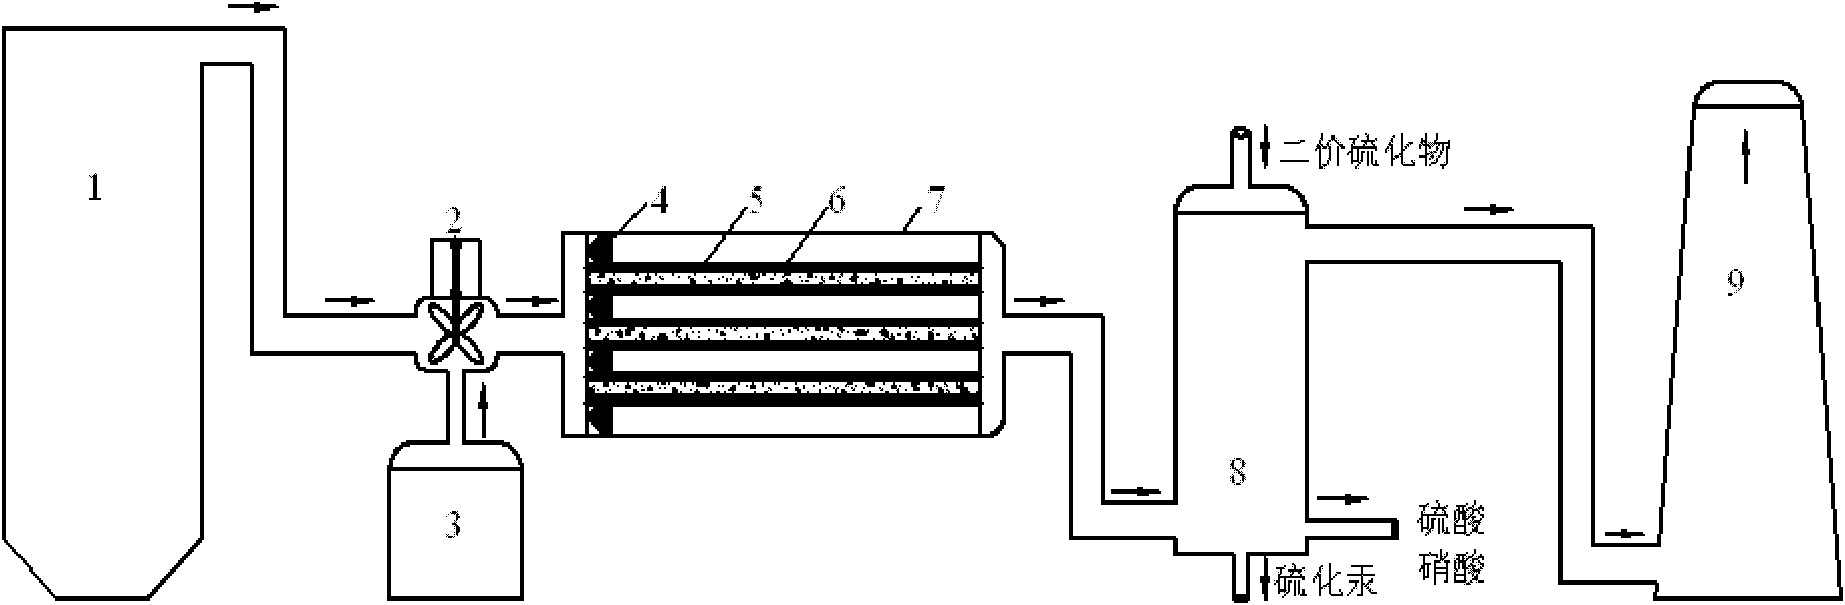 Fume purification system based on advanced oxygenation combining wet scrubbing